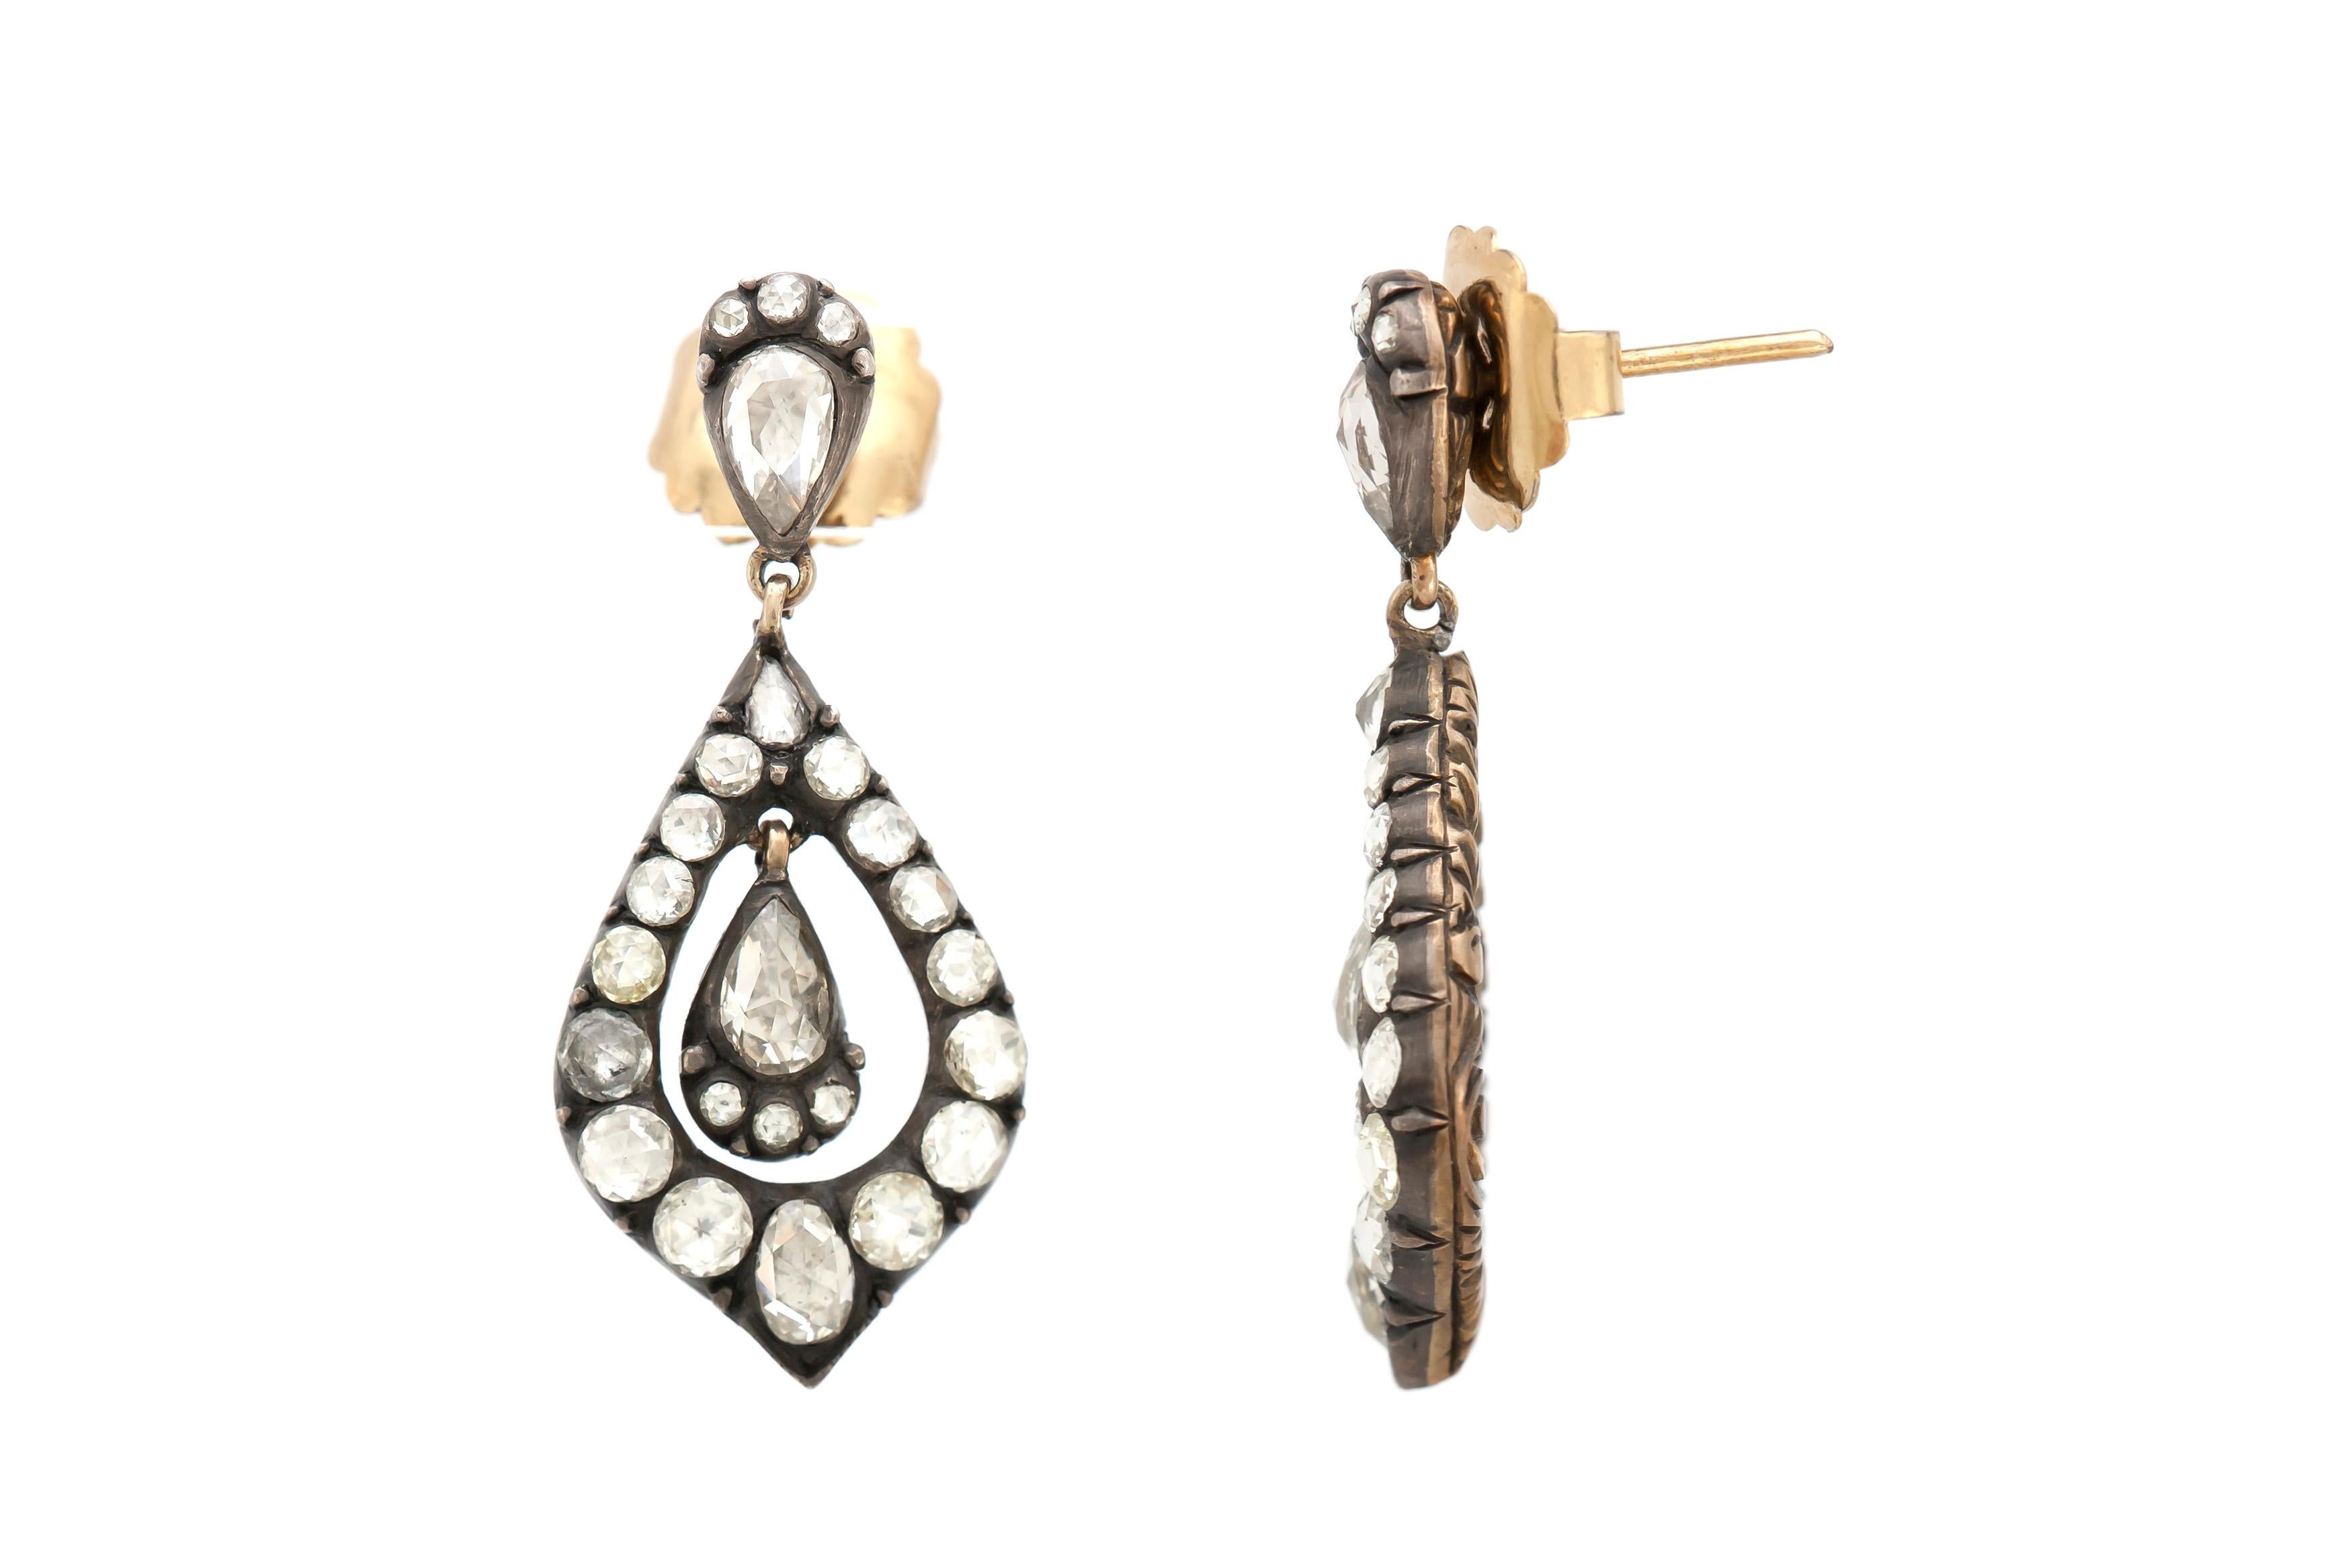 The earrings are finely crafted in silver and gold with beautiful diamonds weighing total of 3.71 carat.